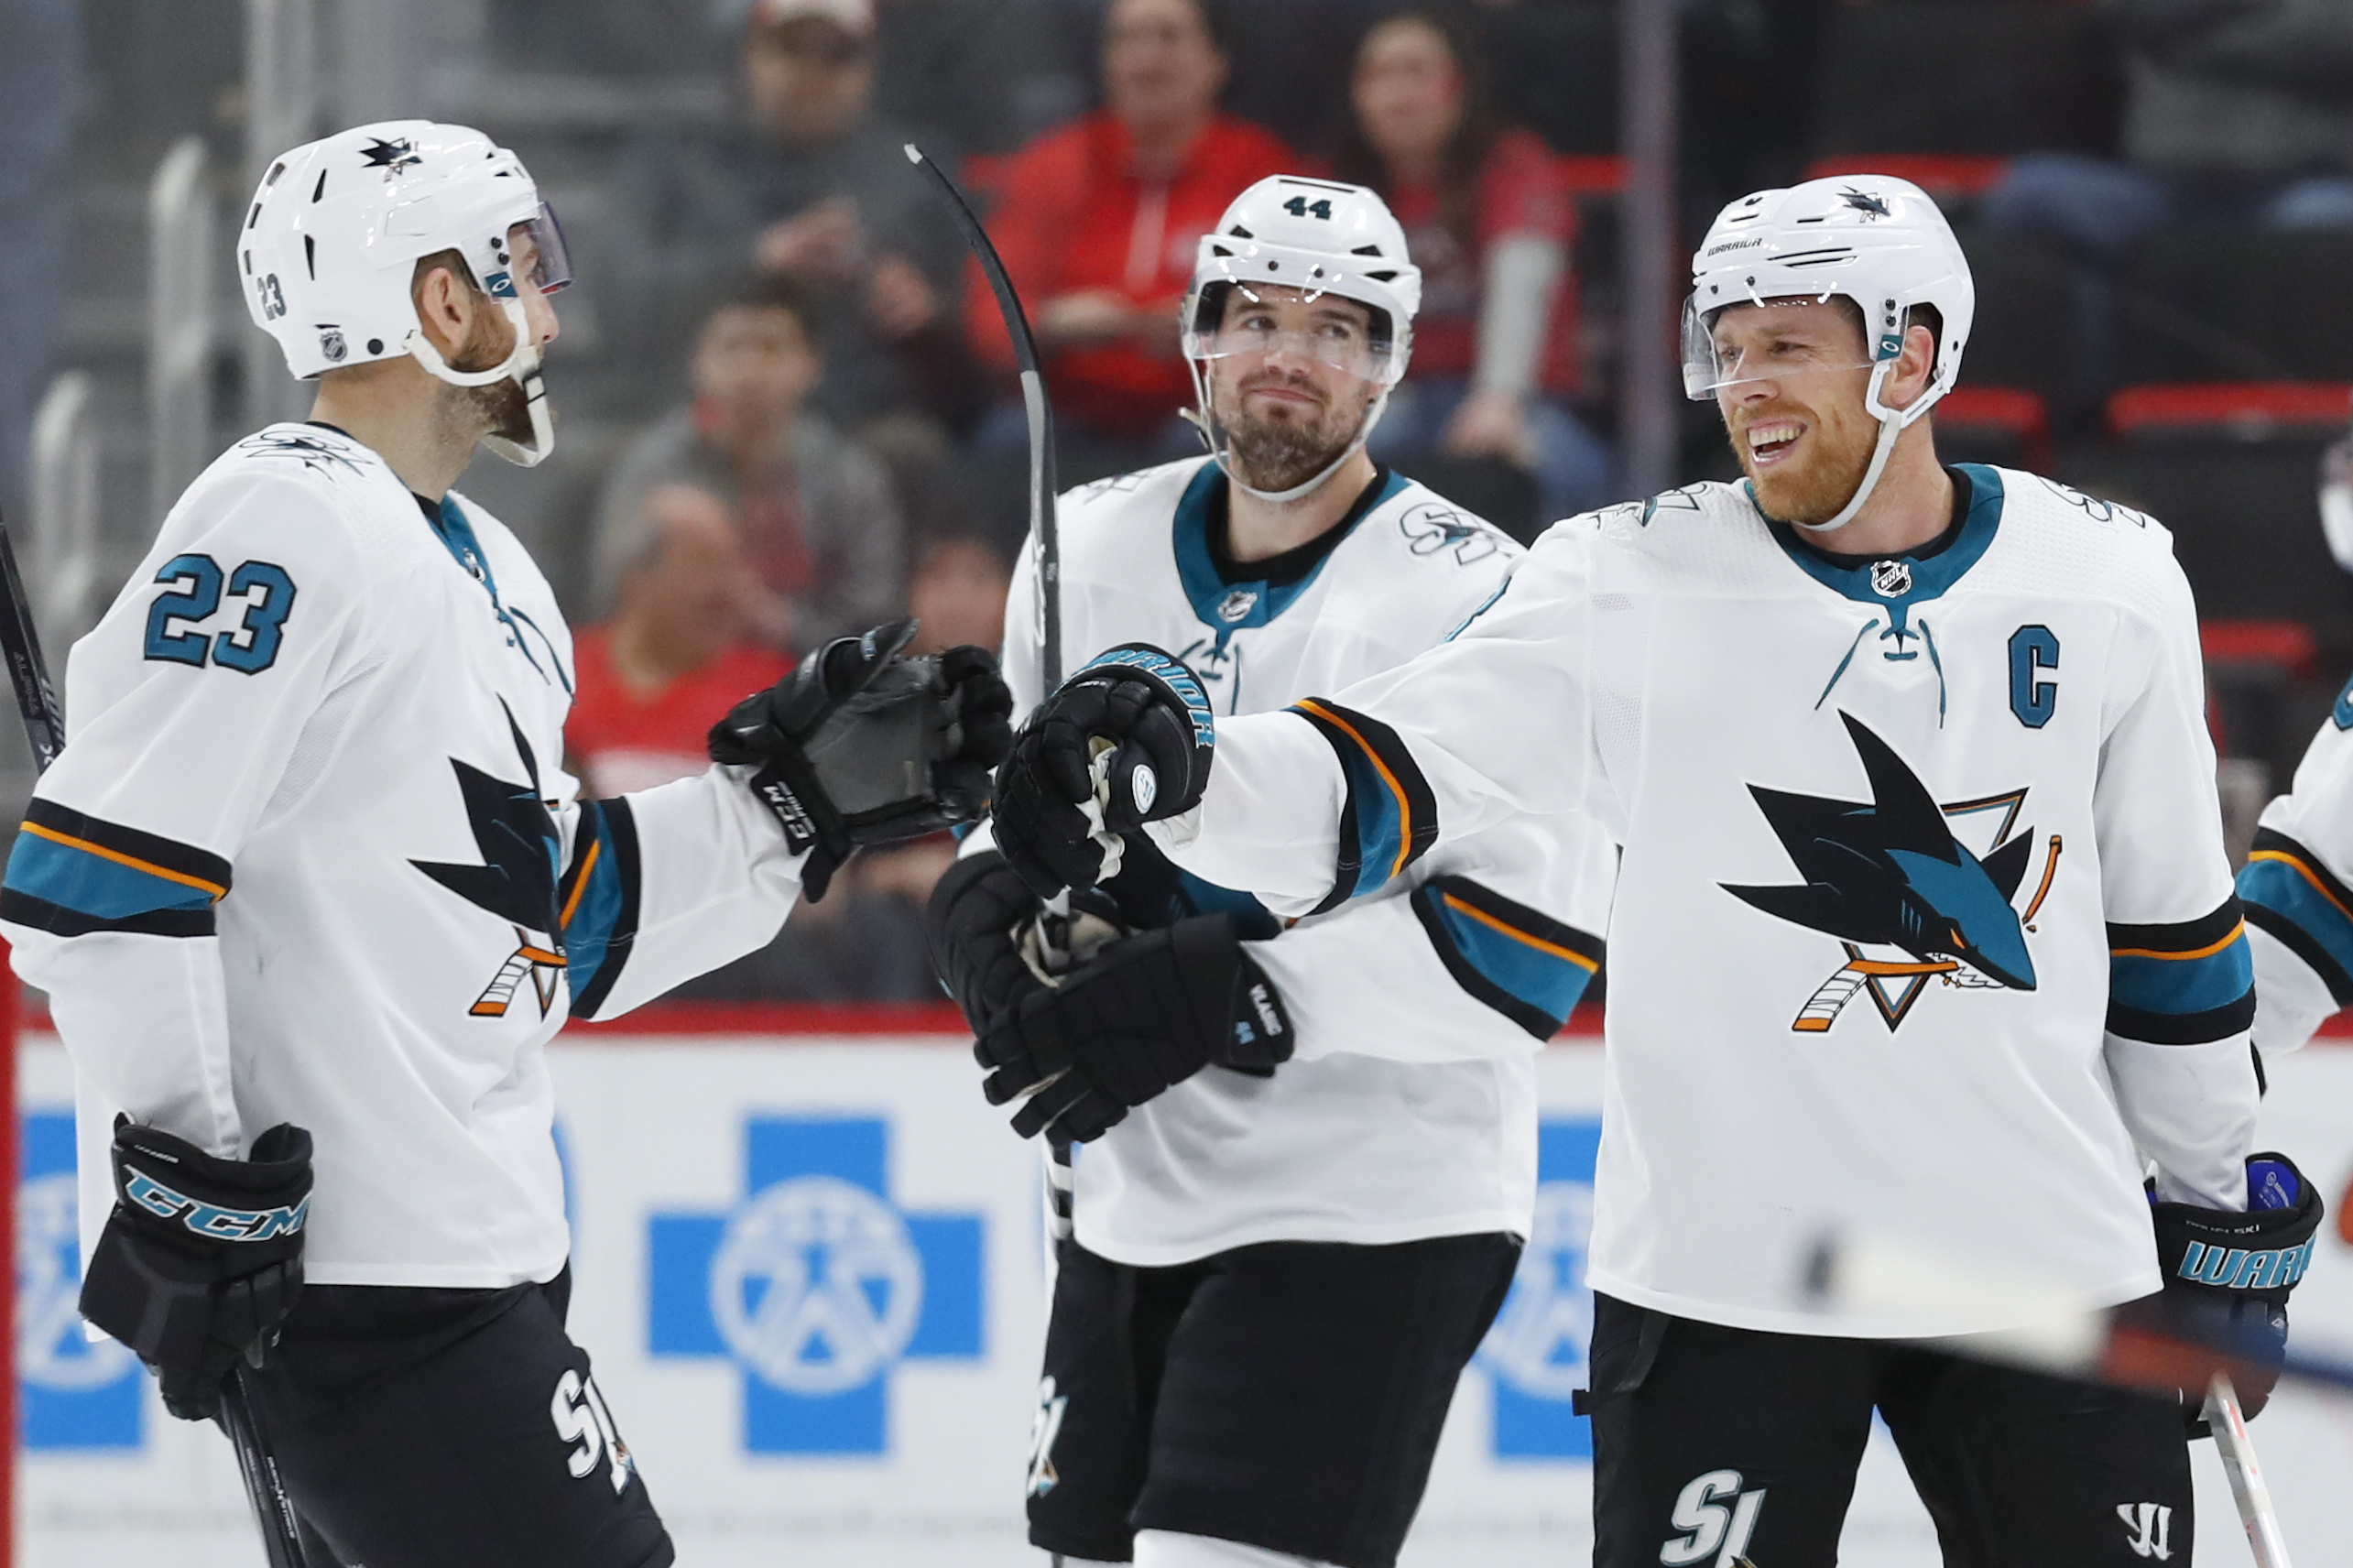 Pavelski has hat trick in Sharks’ 5-3 win over Red Wings